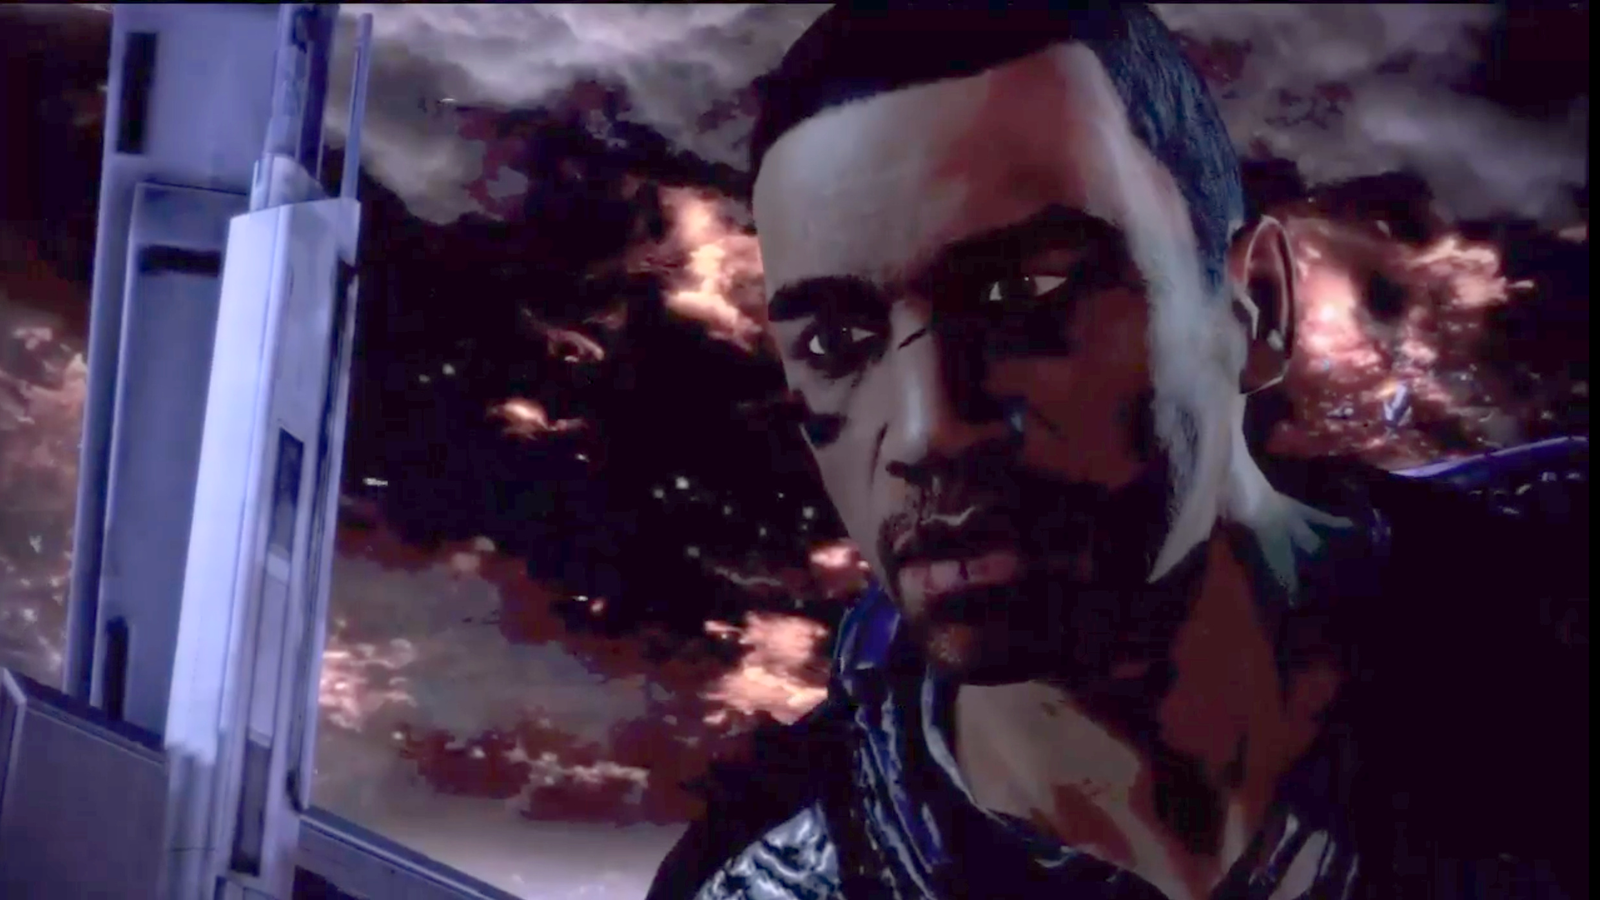 mass effect 3 endings say about you